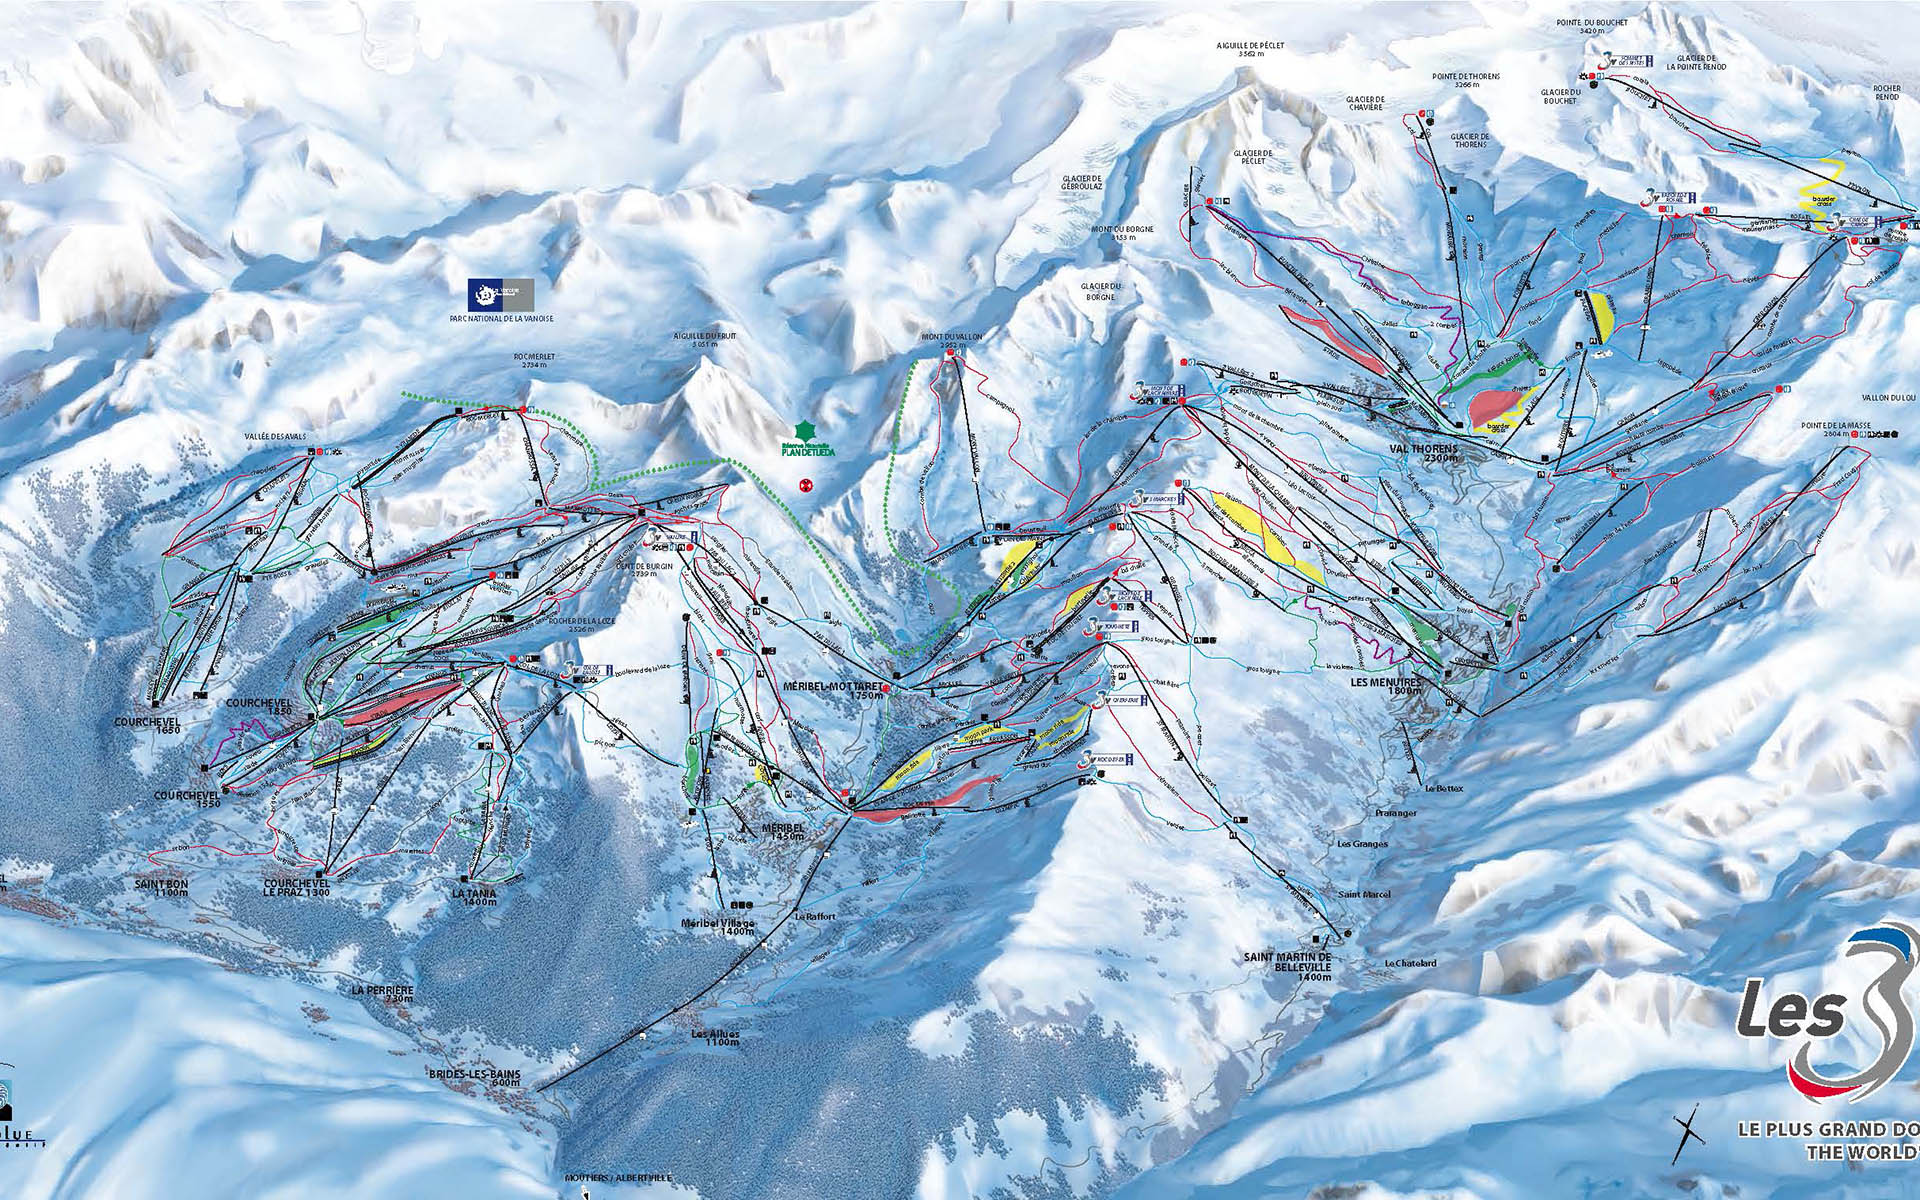 The 3 Valleys – The largest ski area in the world